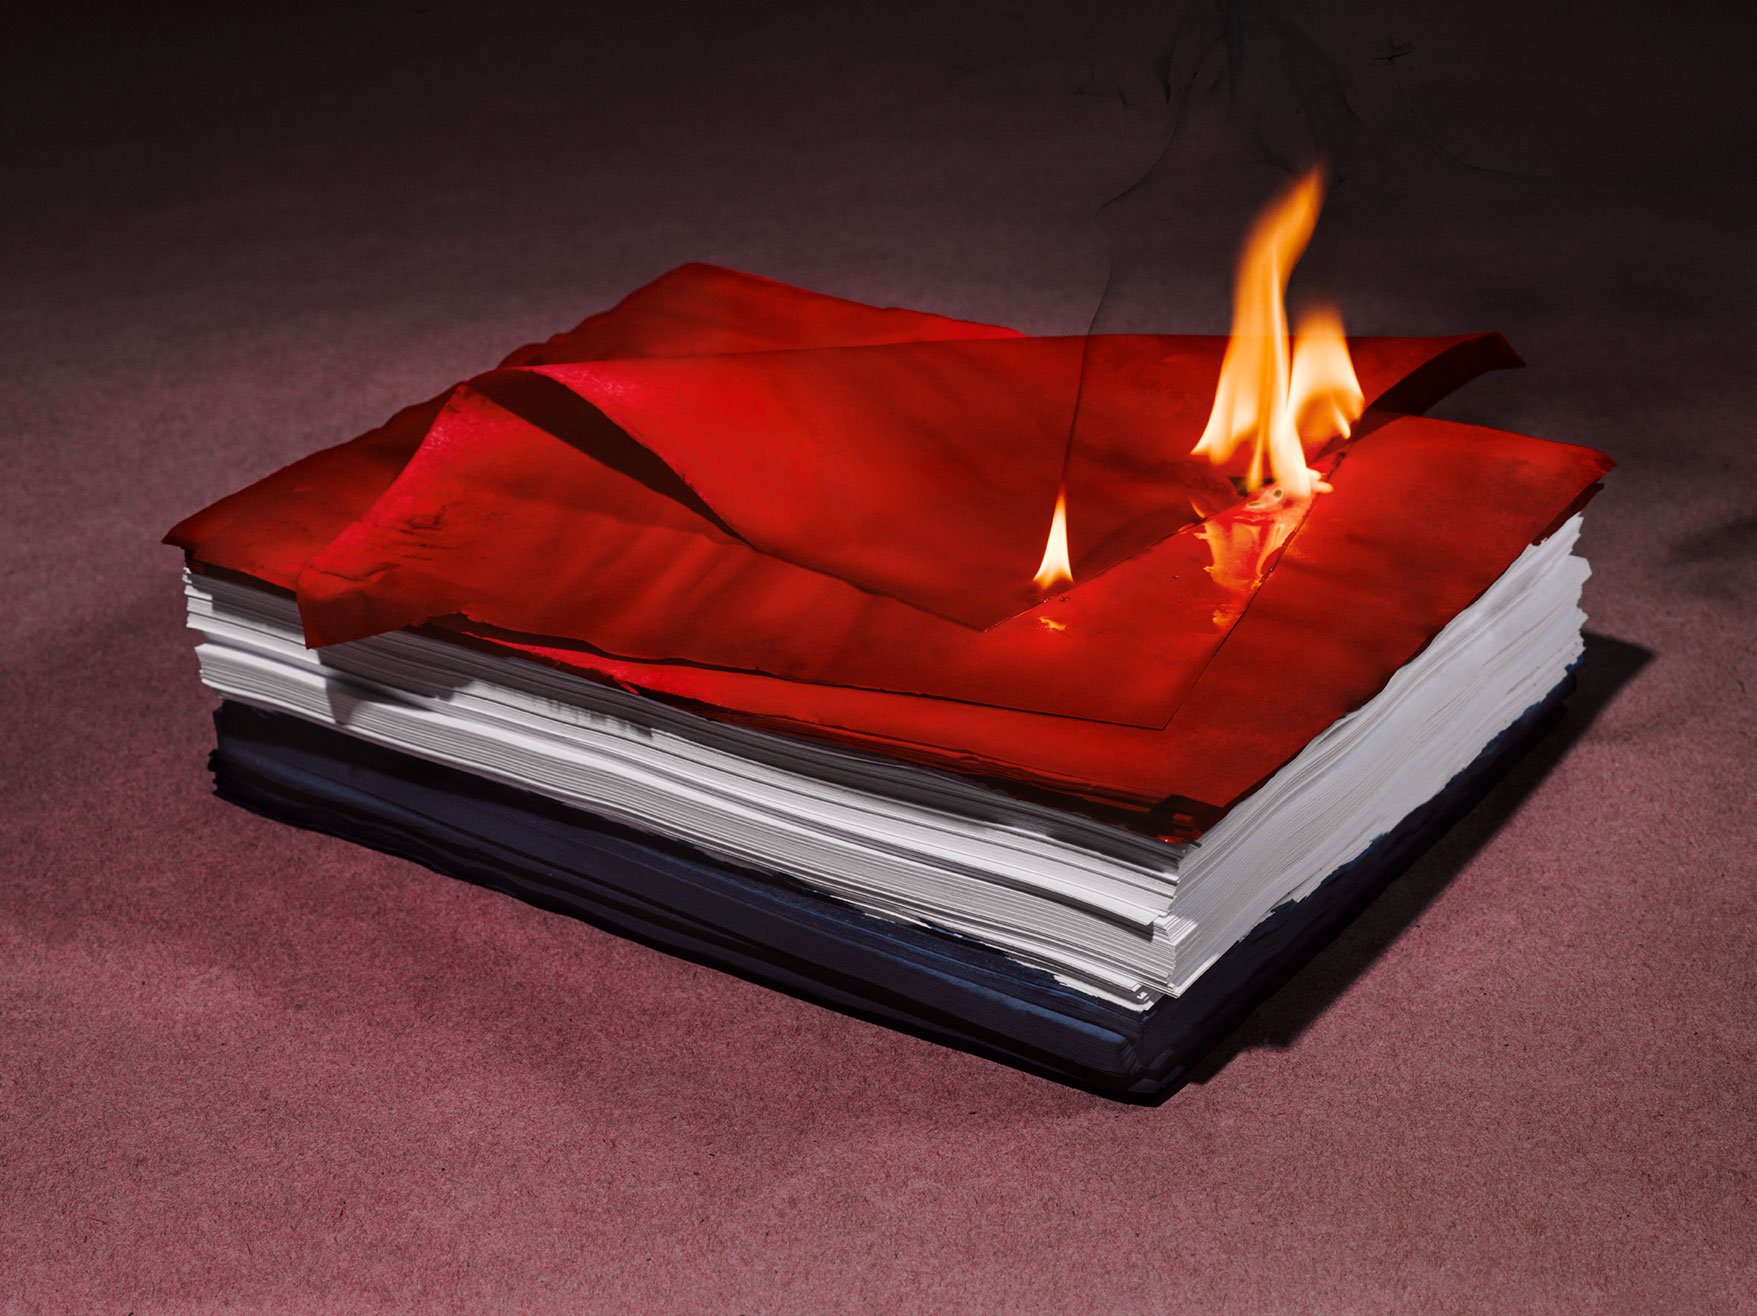 Still life image of burning paper for Romance Journal Issue 02 resistance. Publication design, art direction, print design by RoAndCo. 